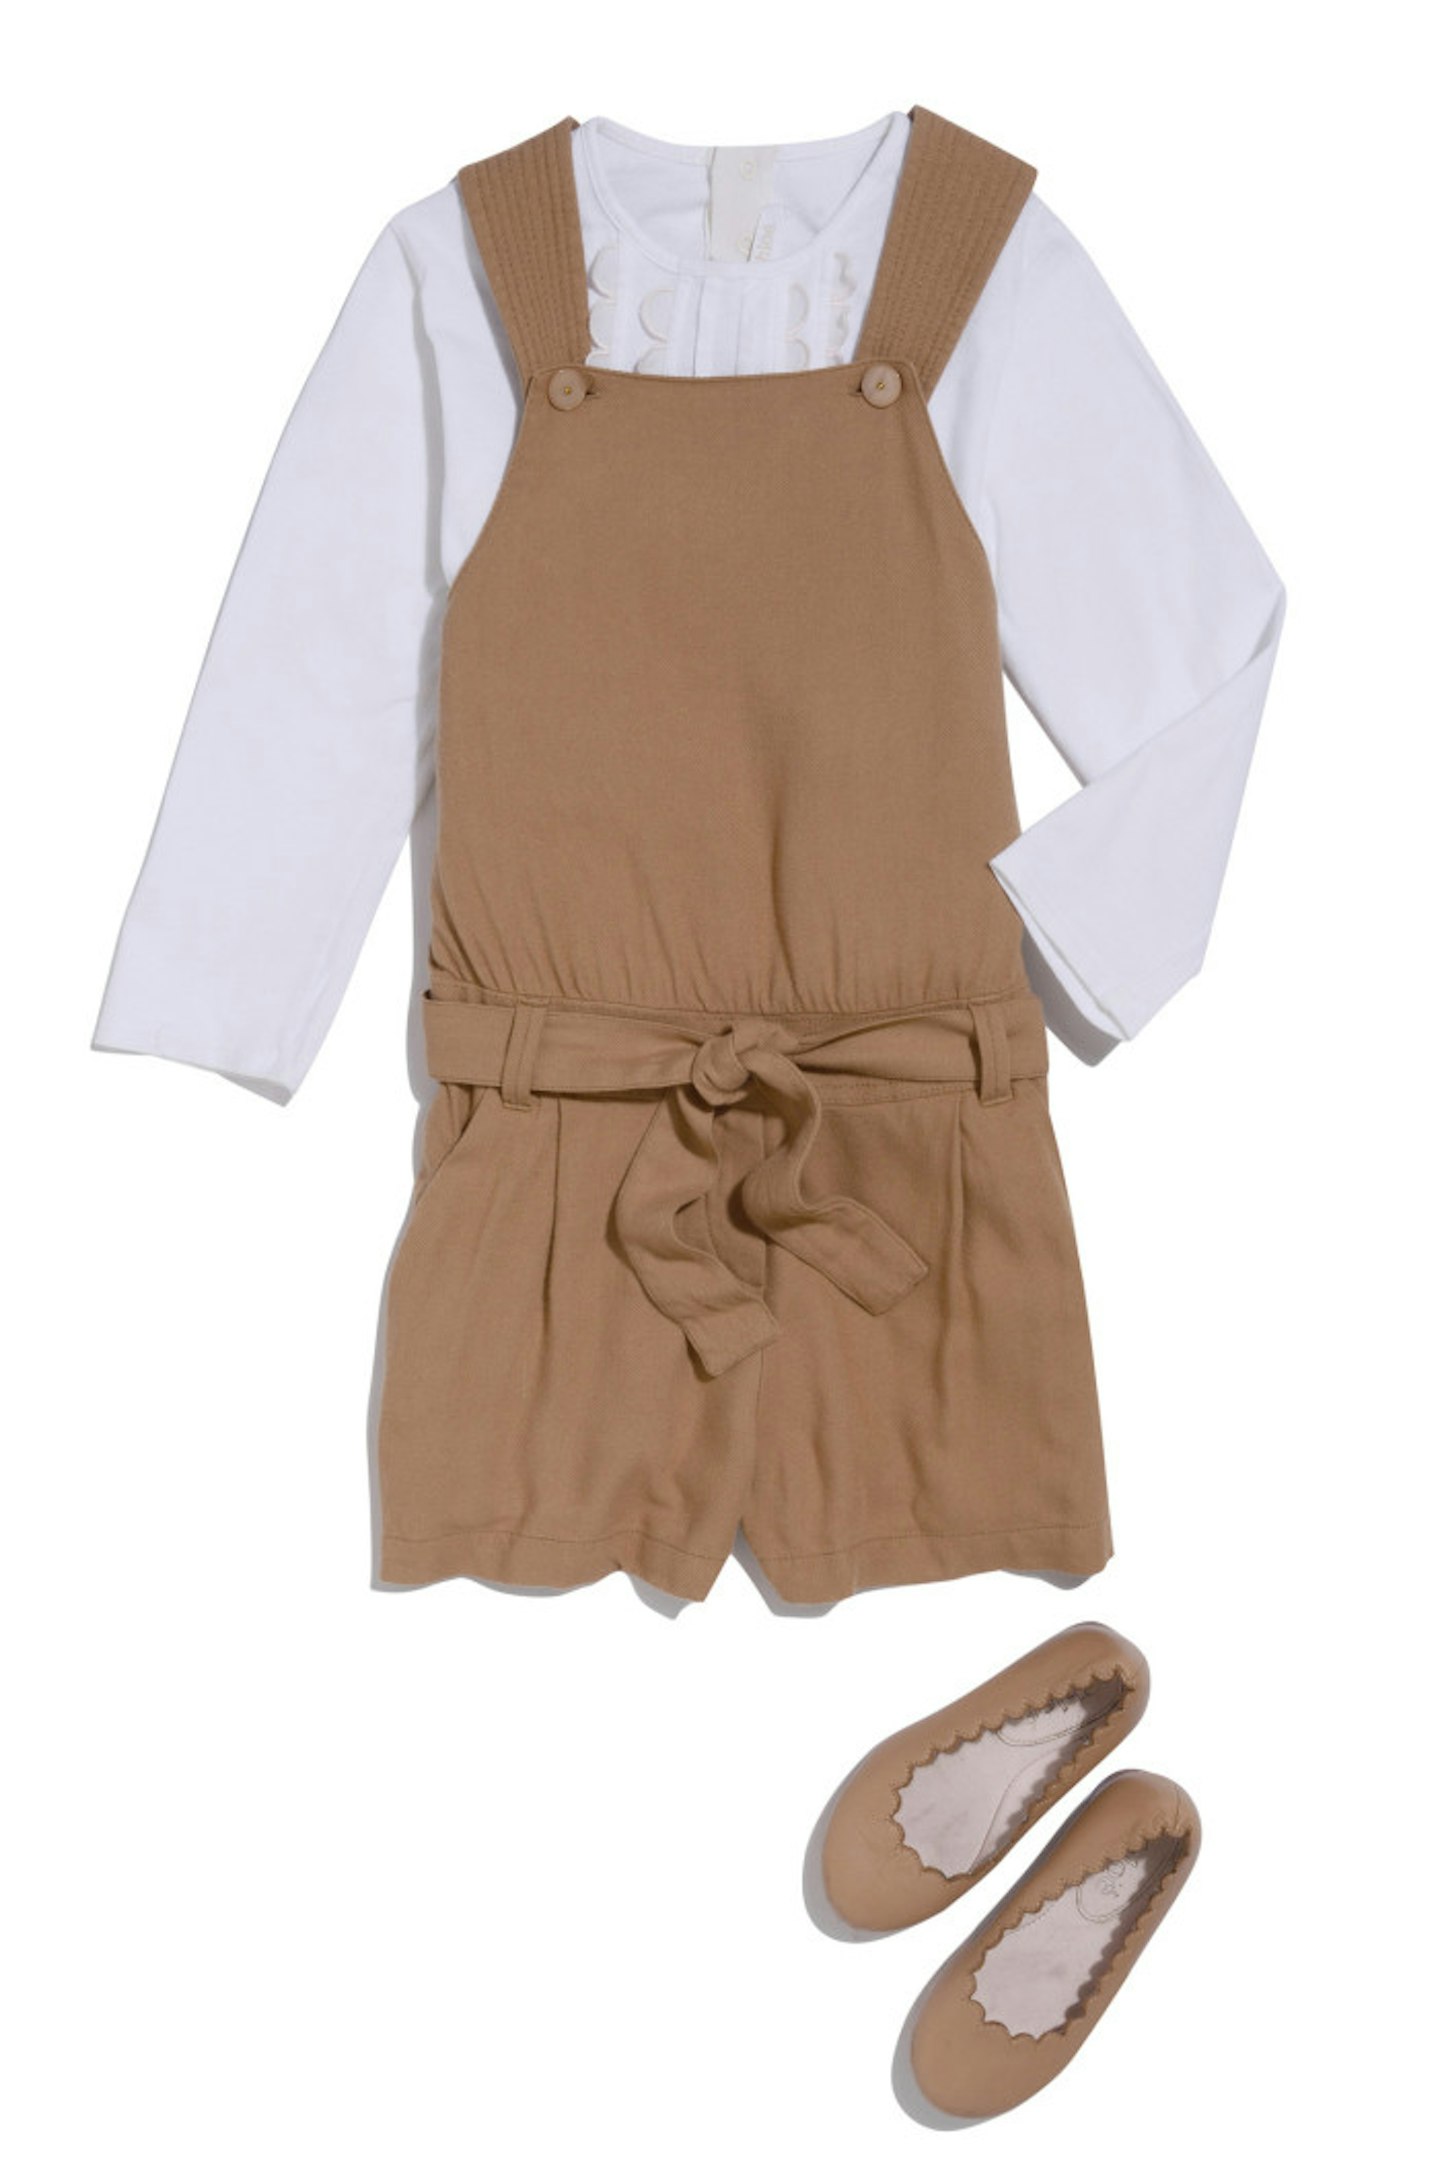 Chloe brown playsuit paired with a Chloe white ruffle top and Chloe brown pumps